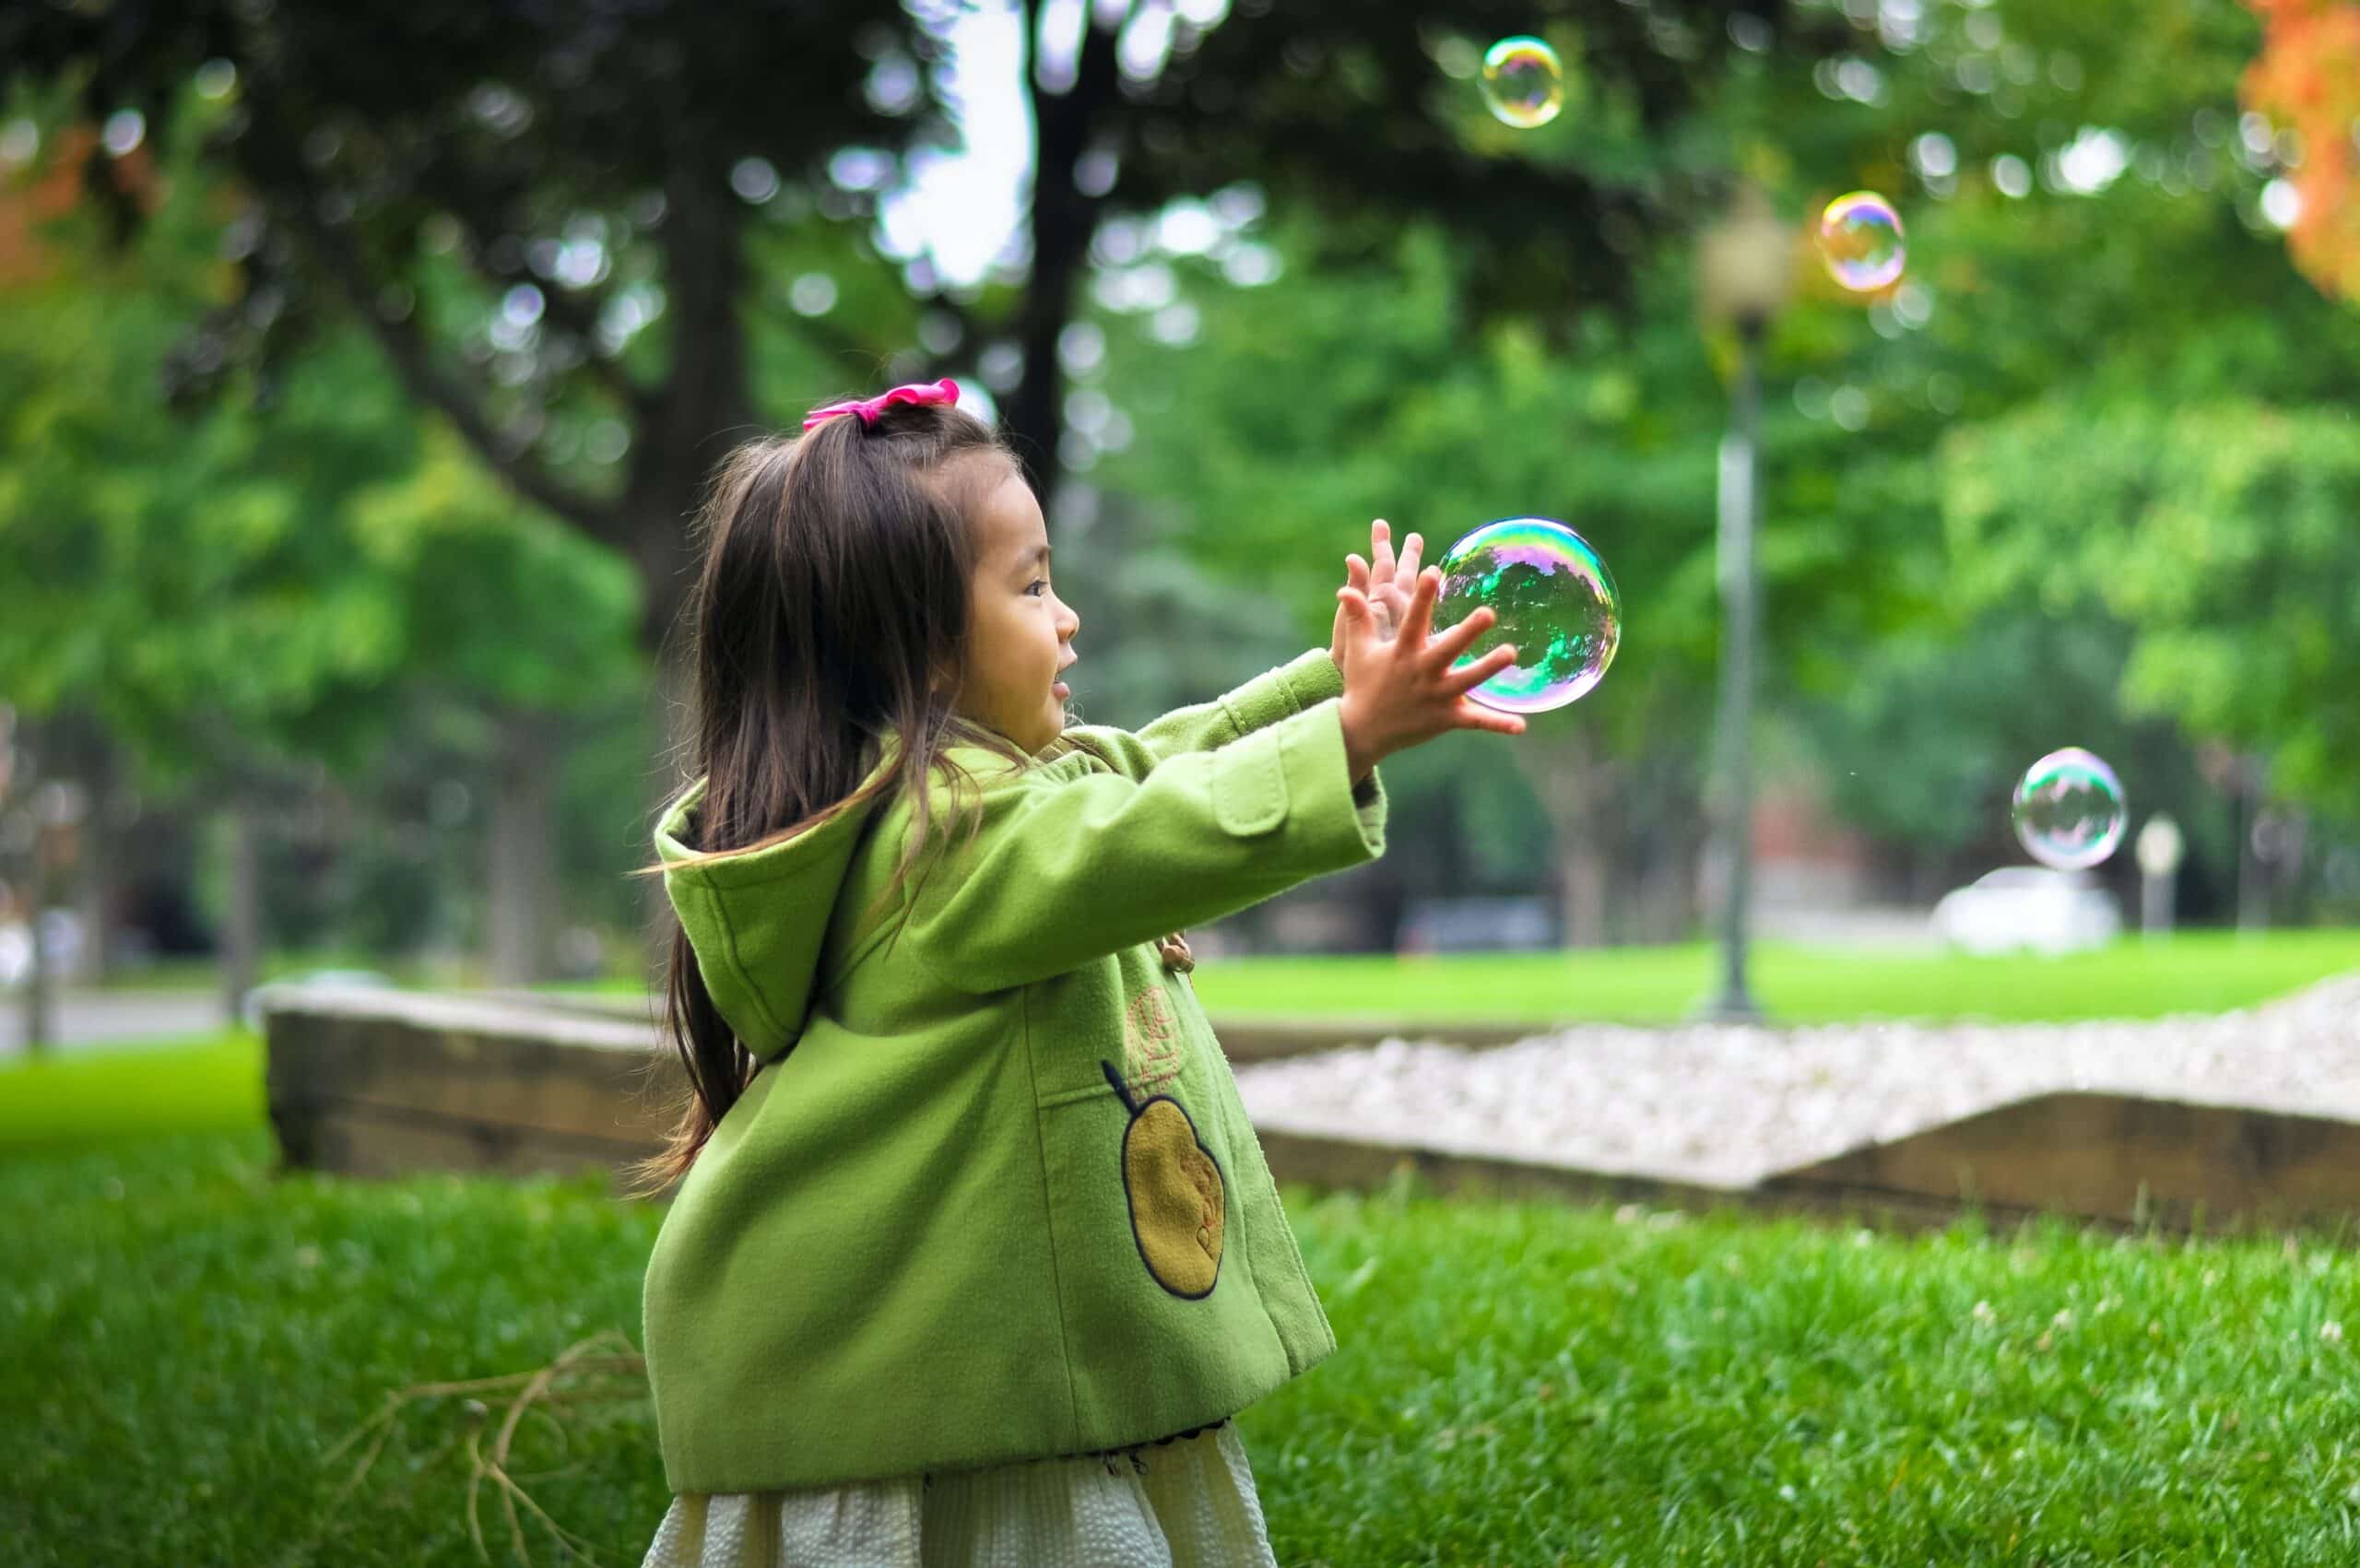 A small girl playing with bubbles